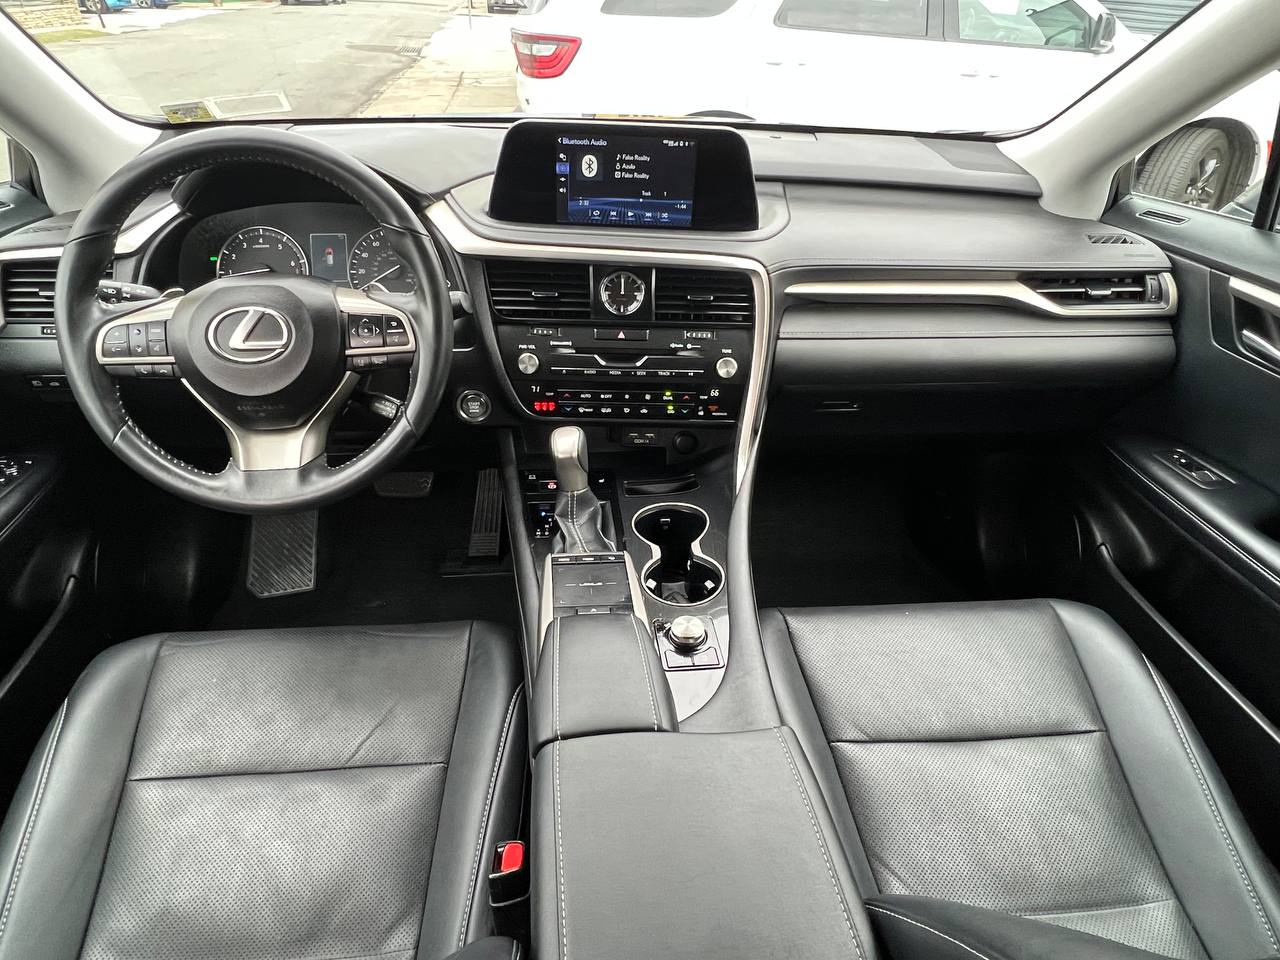 Used - Lexus RX 350 SUV for sale in Staten Island NY